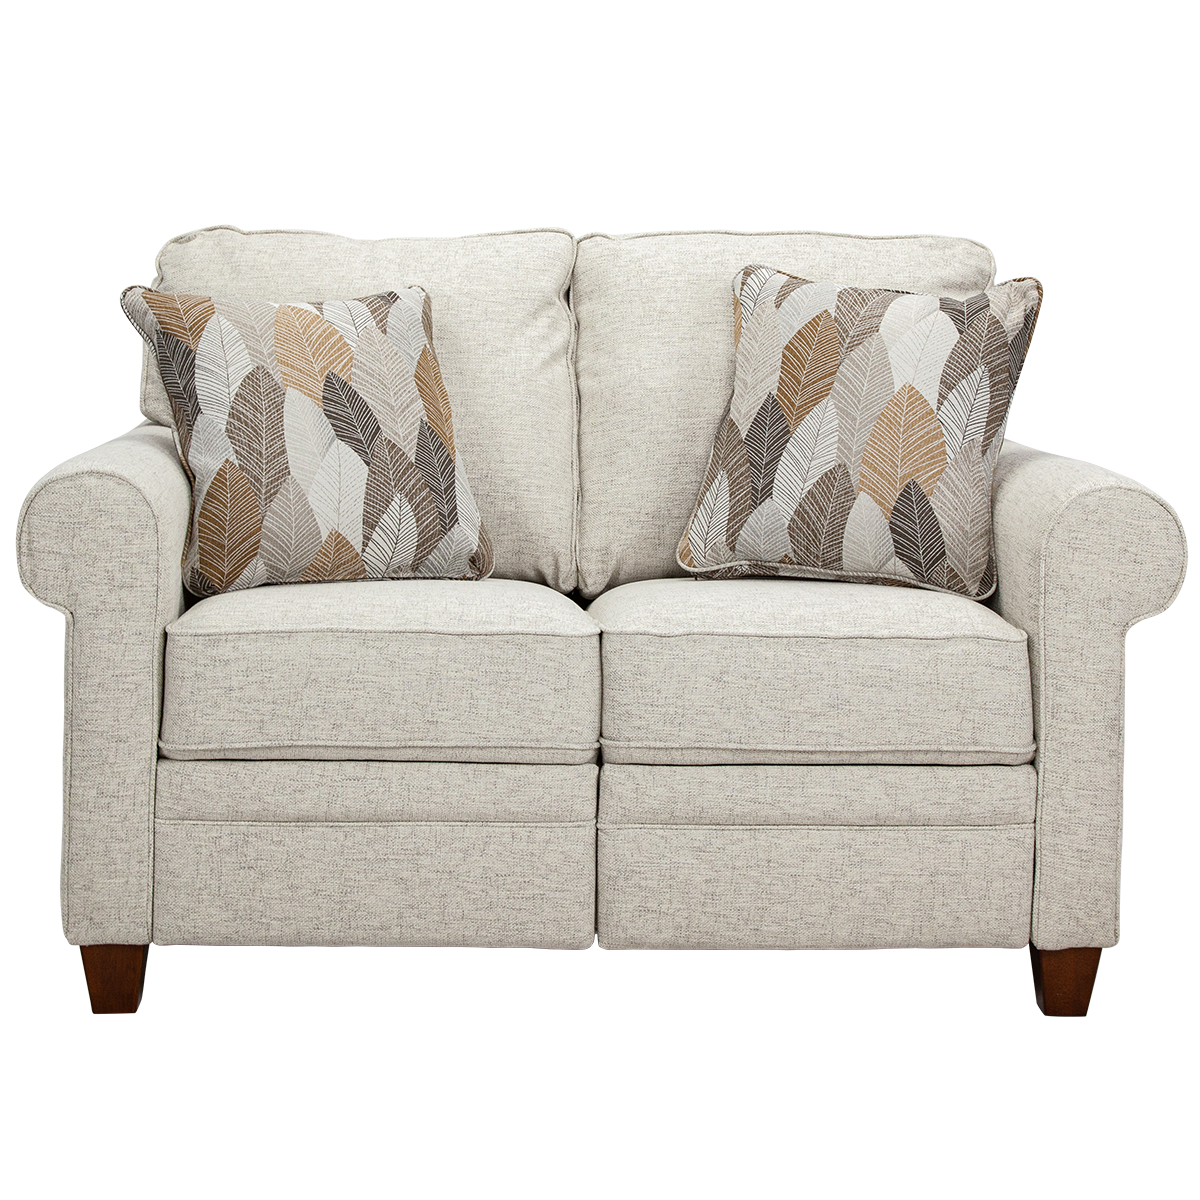 Picture of COLBY DUO RECLINING LOVESEAT